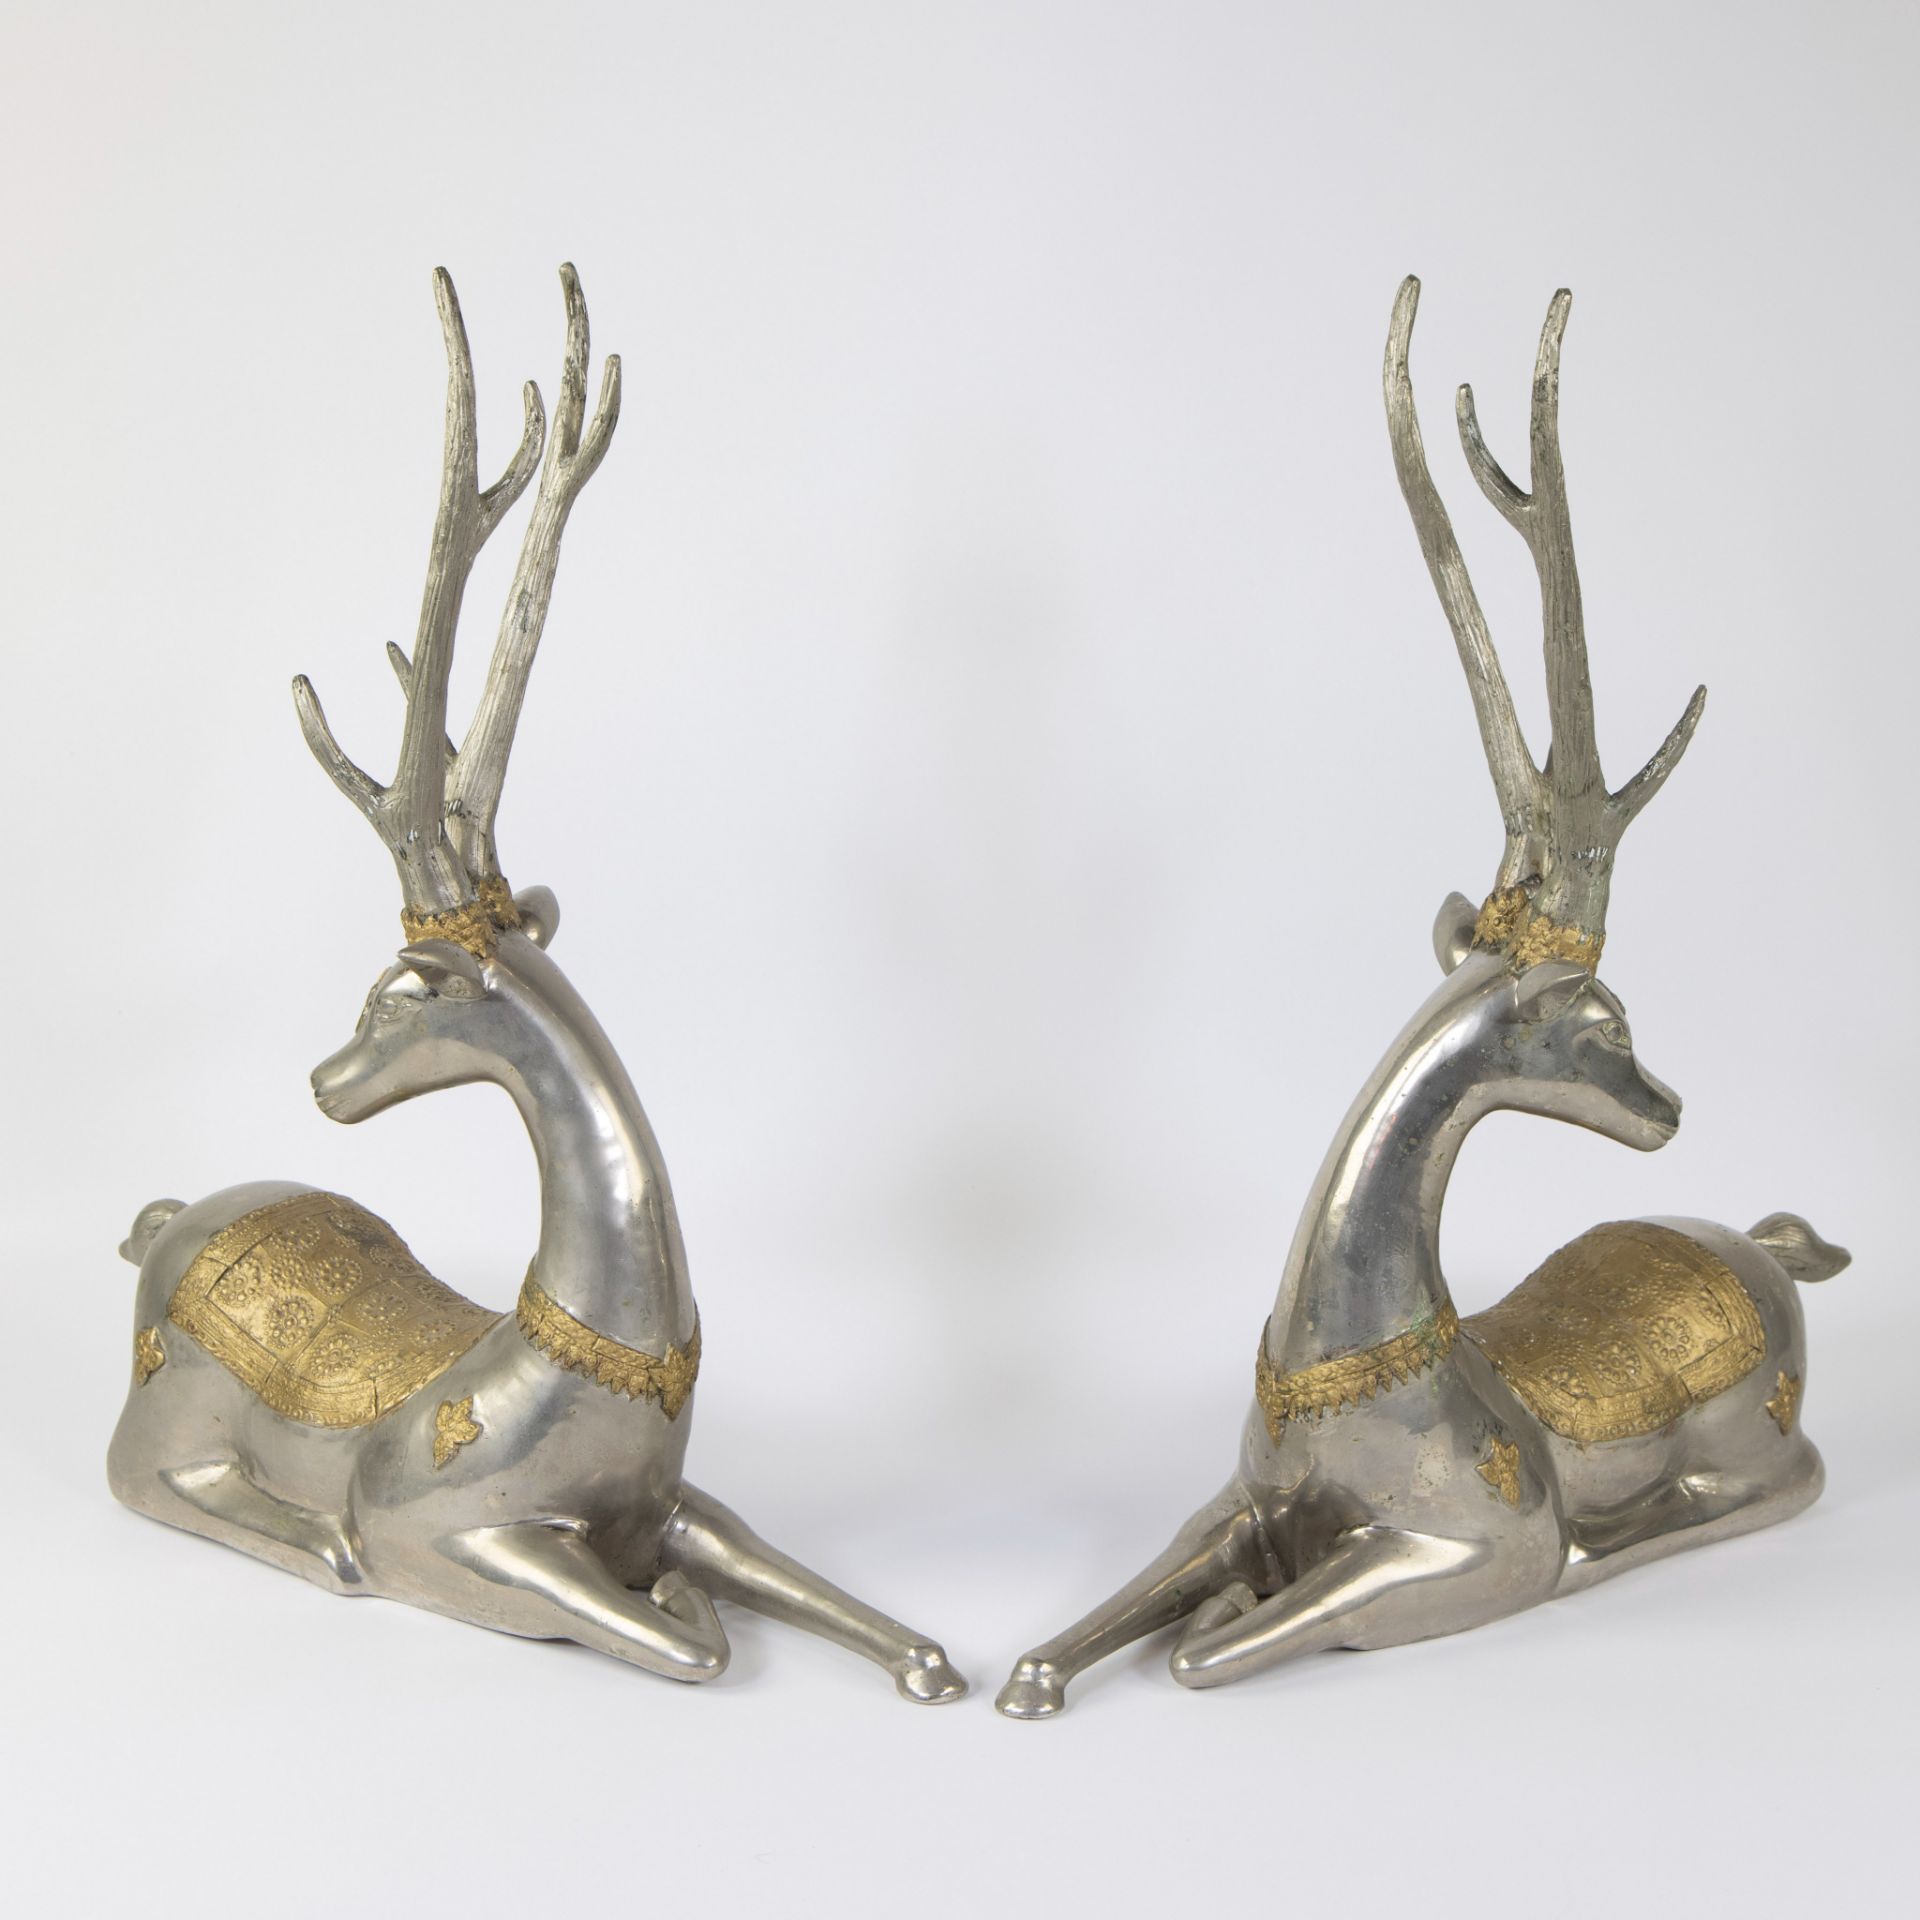 Pair of silver-plated and gilded deer in brass